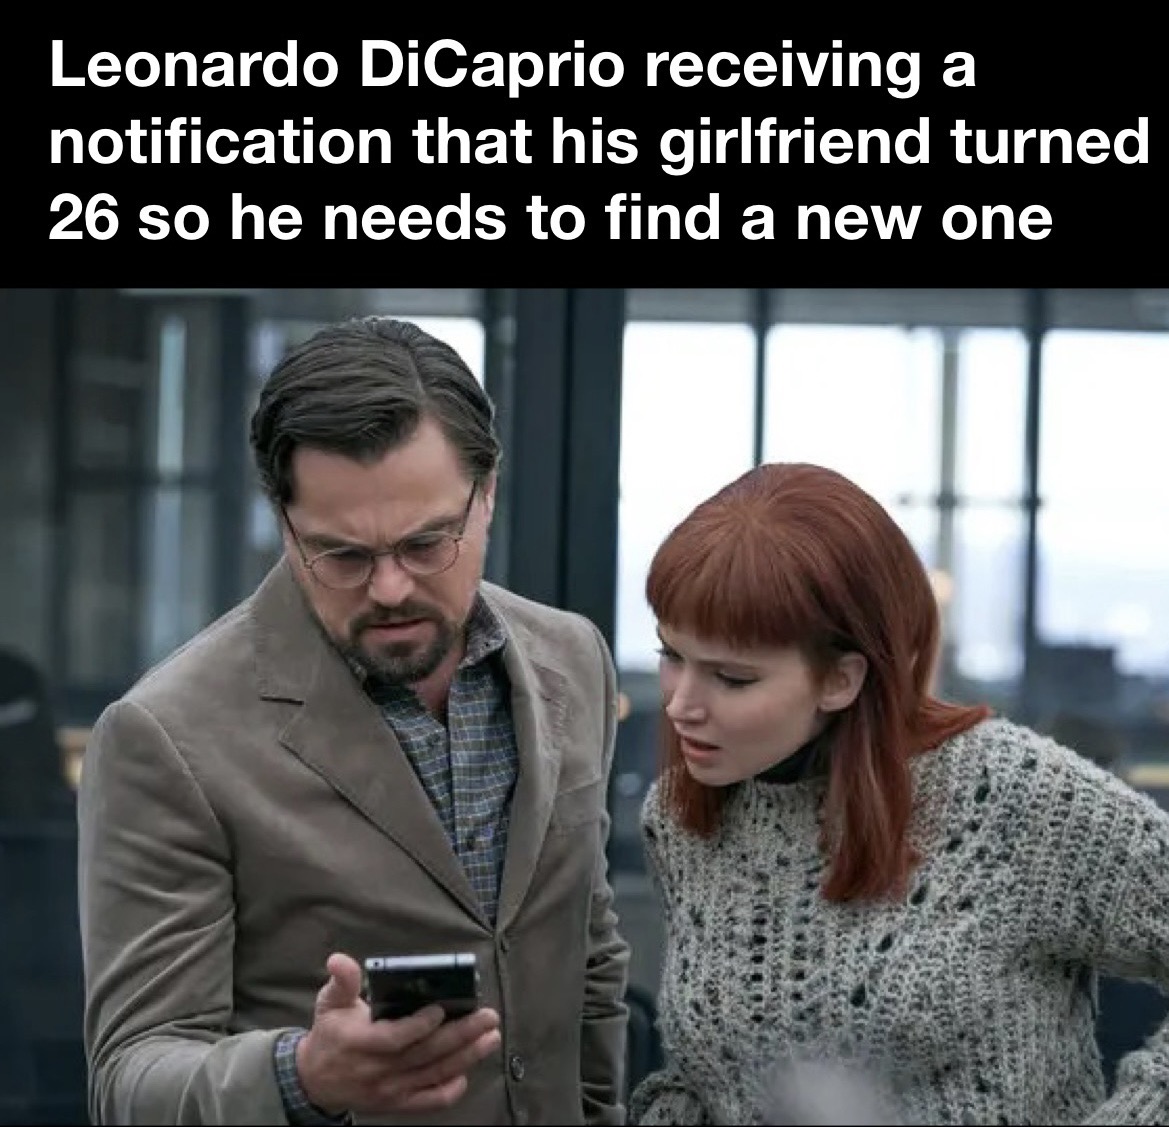 jennifer lawrence leonardo dicaprio - a Leonardo DiCaprio receiving notification that his girlfriend turned 26 so he needs to find a new one Des 22 3336